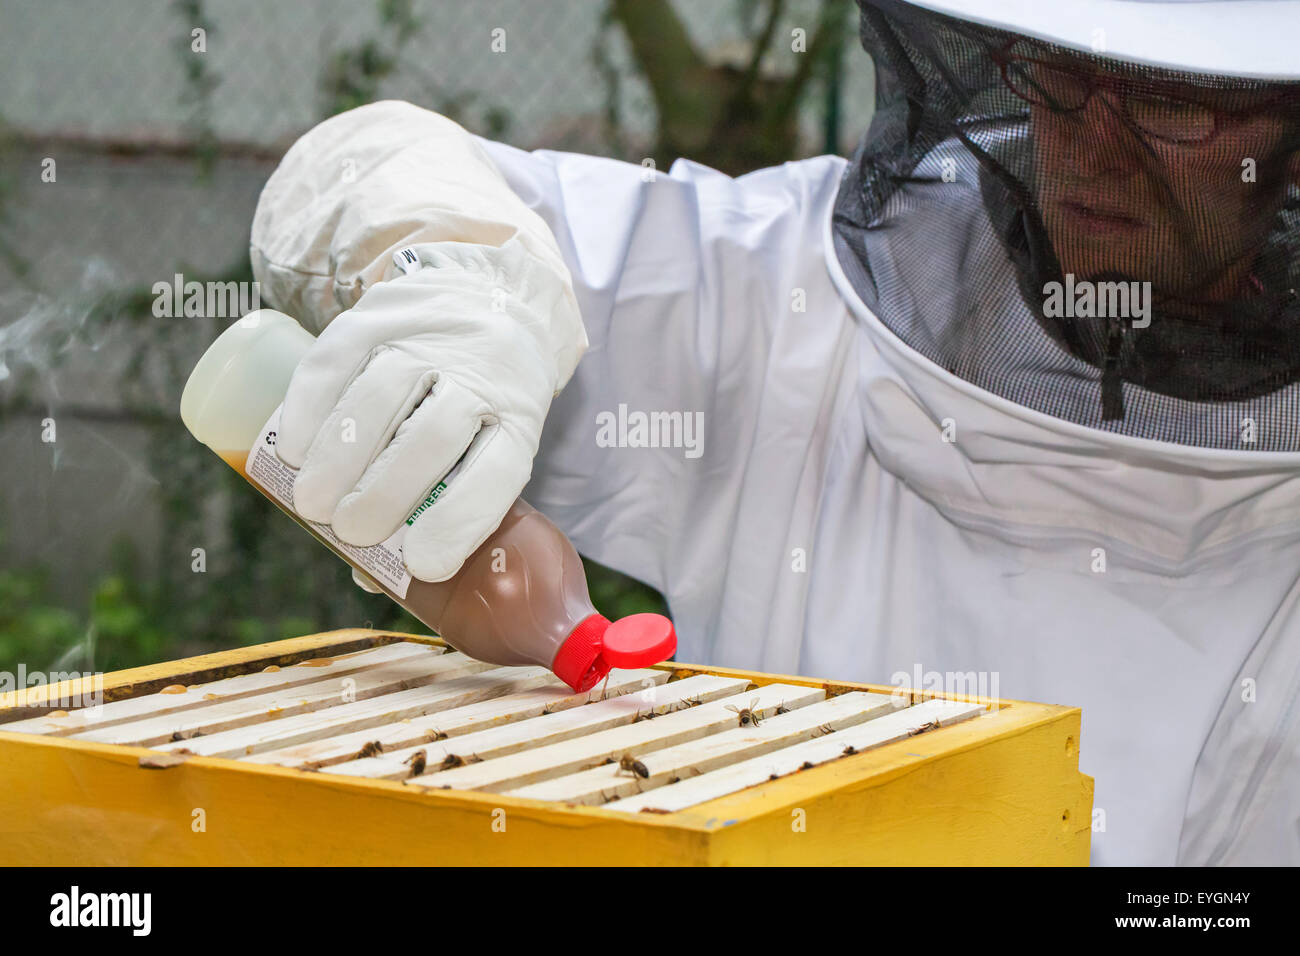 Beekeeper in protective clothing adding Beevital Hiveclean, a natural treatment for honeybees against Varroa mites, to beehive Stock Photo